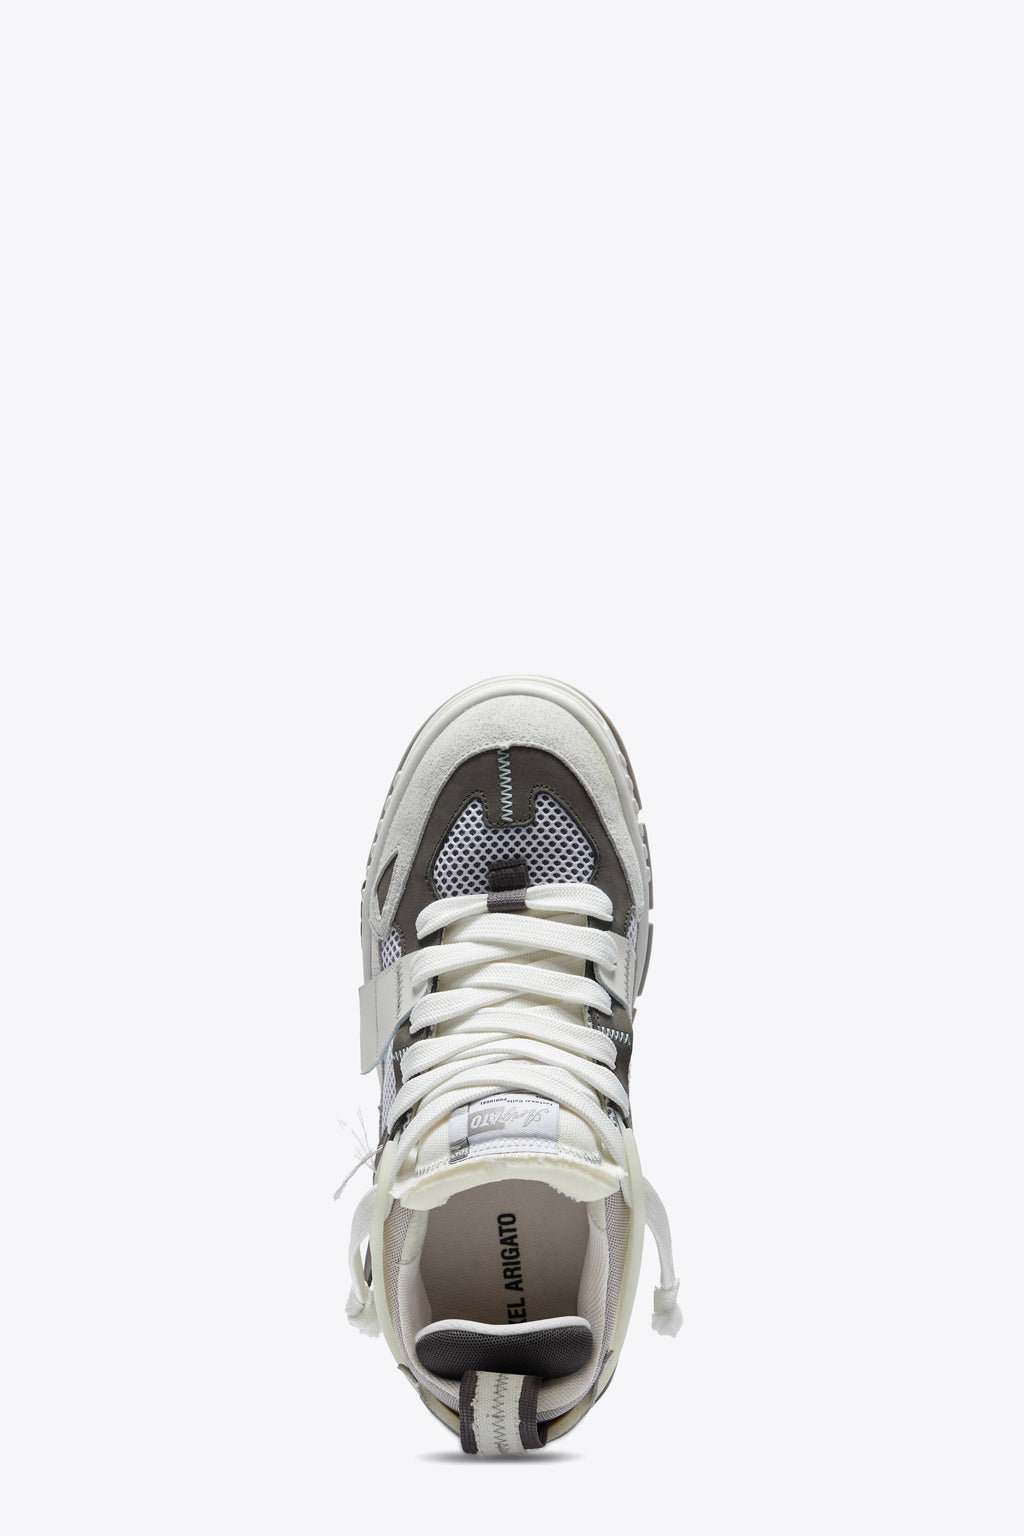 alt-image__White-and-grey-low-sneaker---Area-Patchwork-Sneaker-